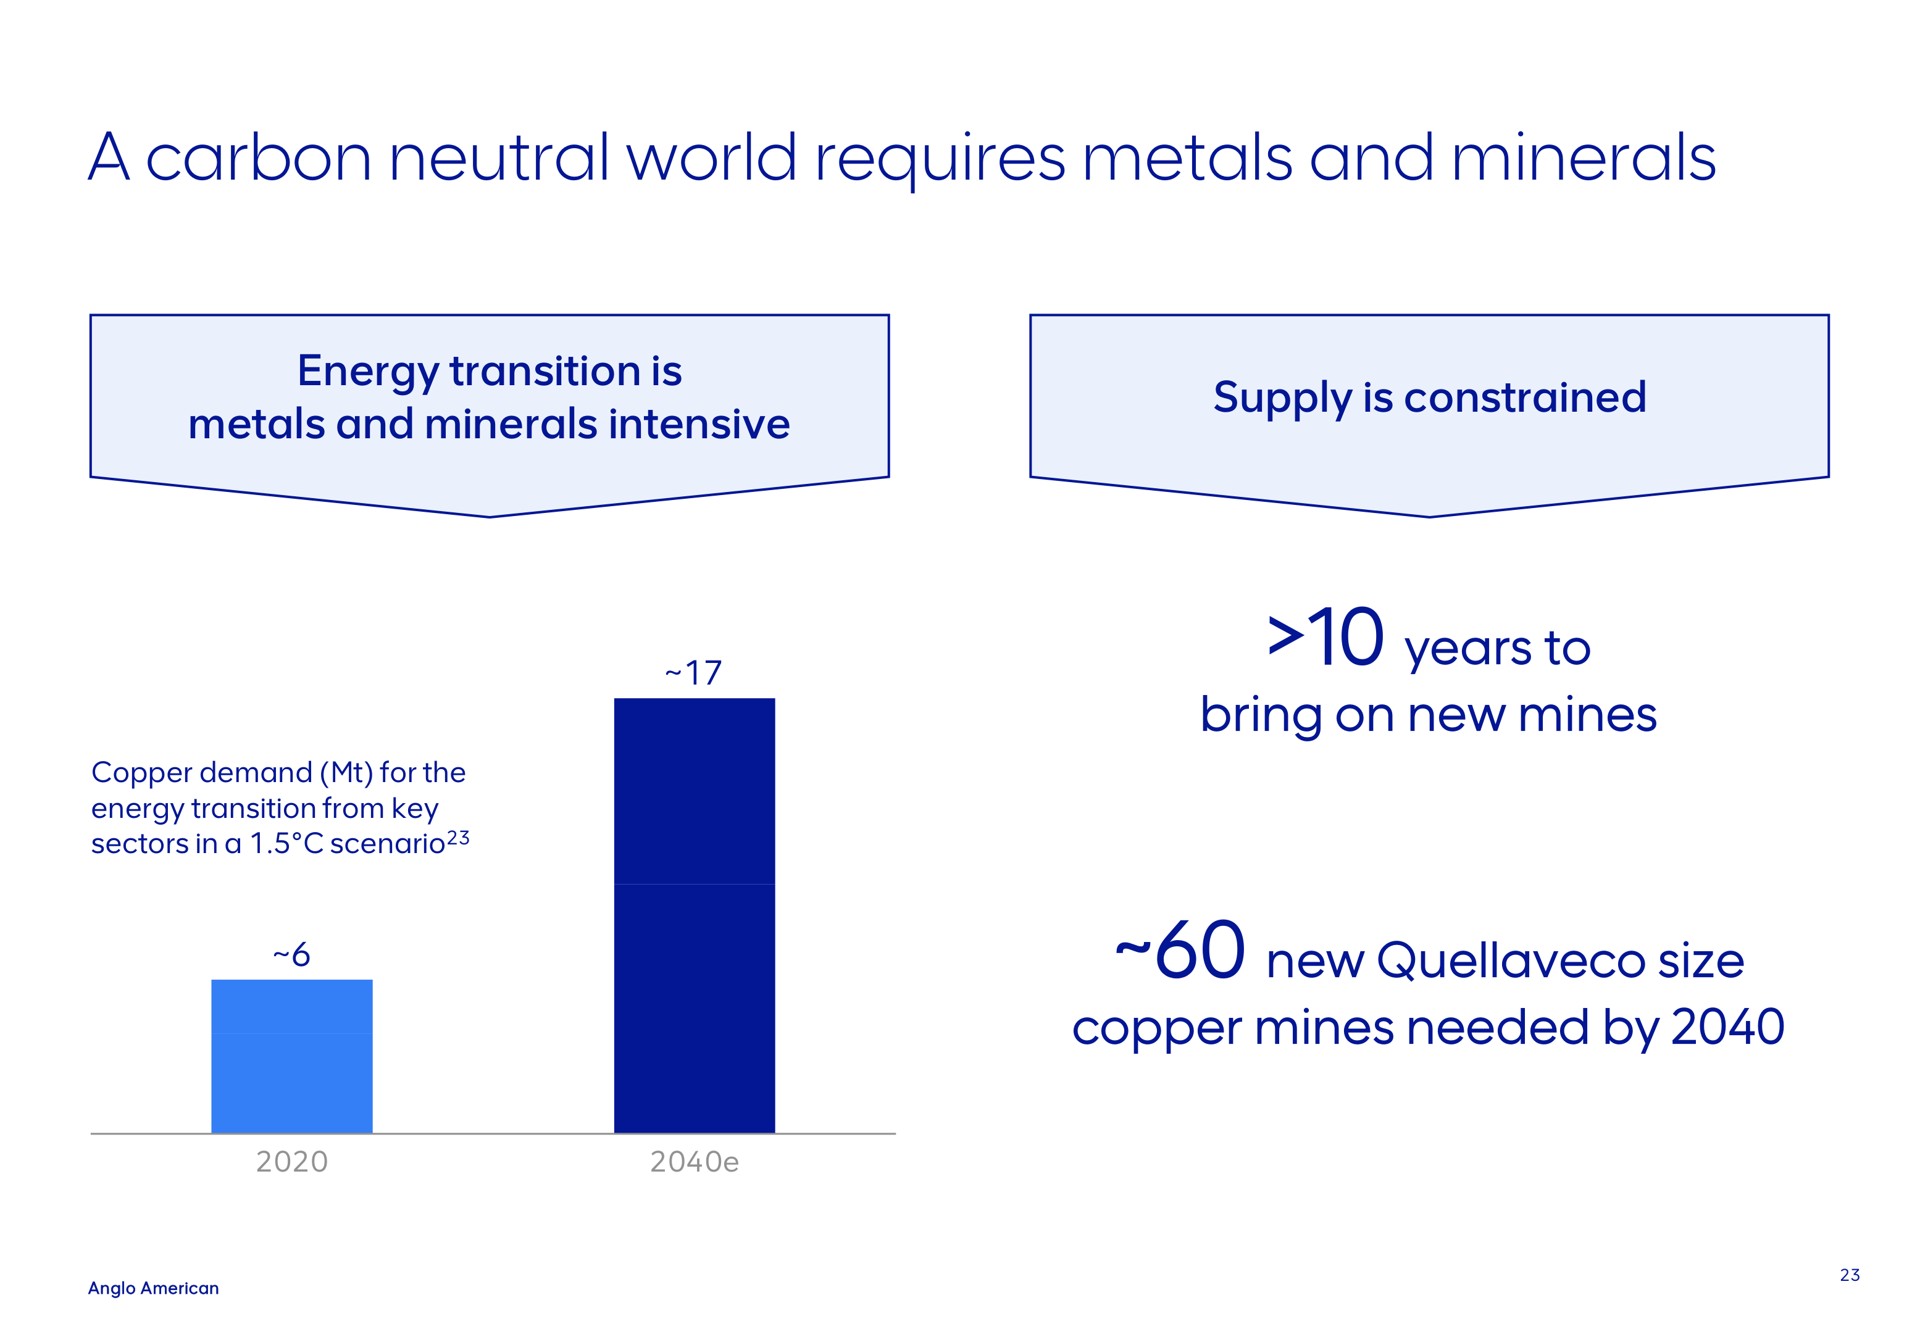 a carbon neutral world requires metals and minerals energy transition is intensive supply is constrained years to bring on new mines new size copper mines needed by copper demand for the energy transition from key sectors scenario | AngloAmerican